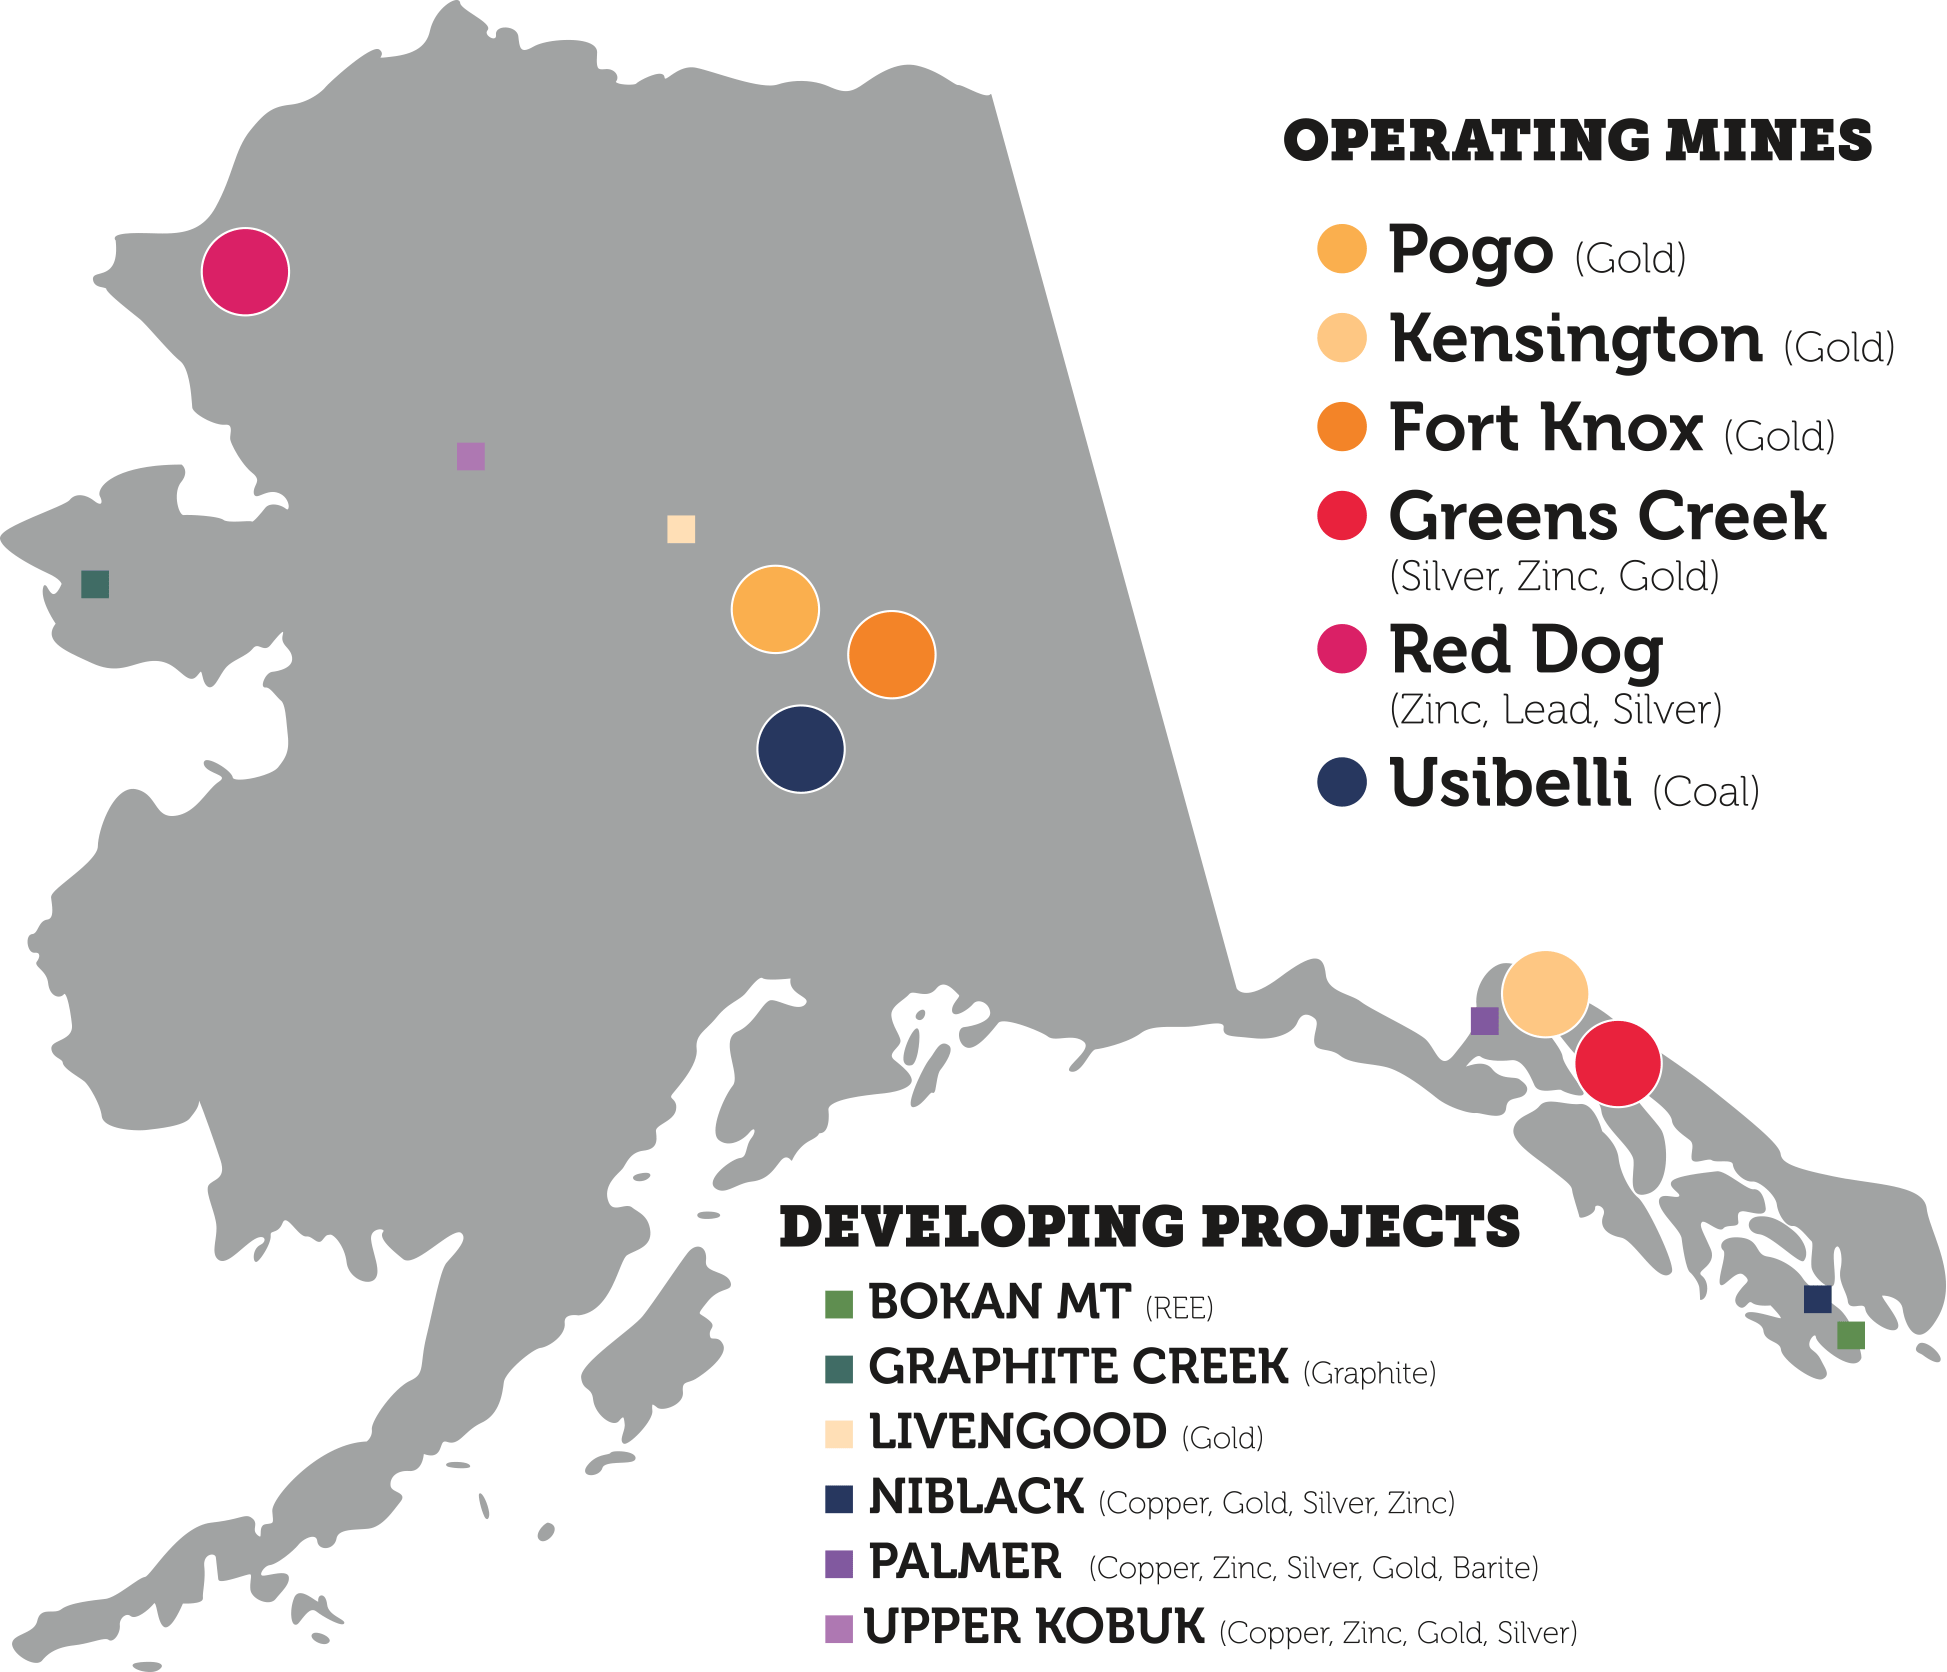 operating mines and developing projects graph